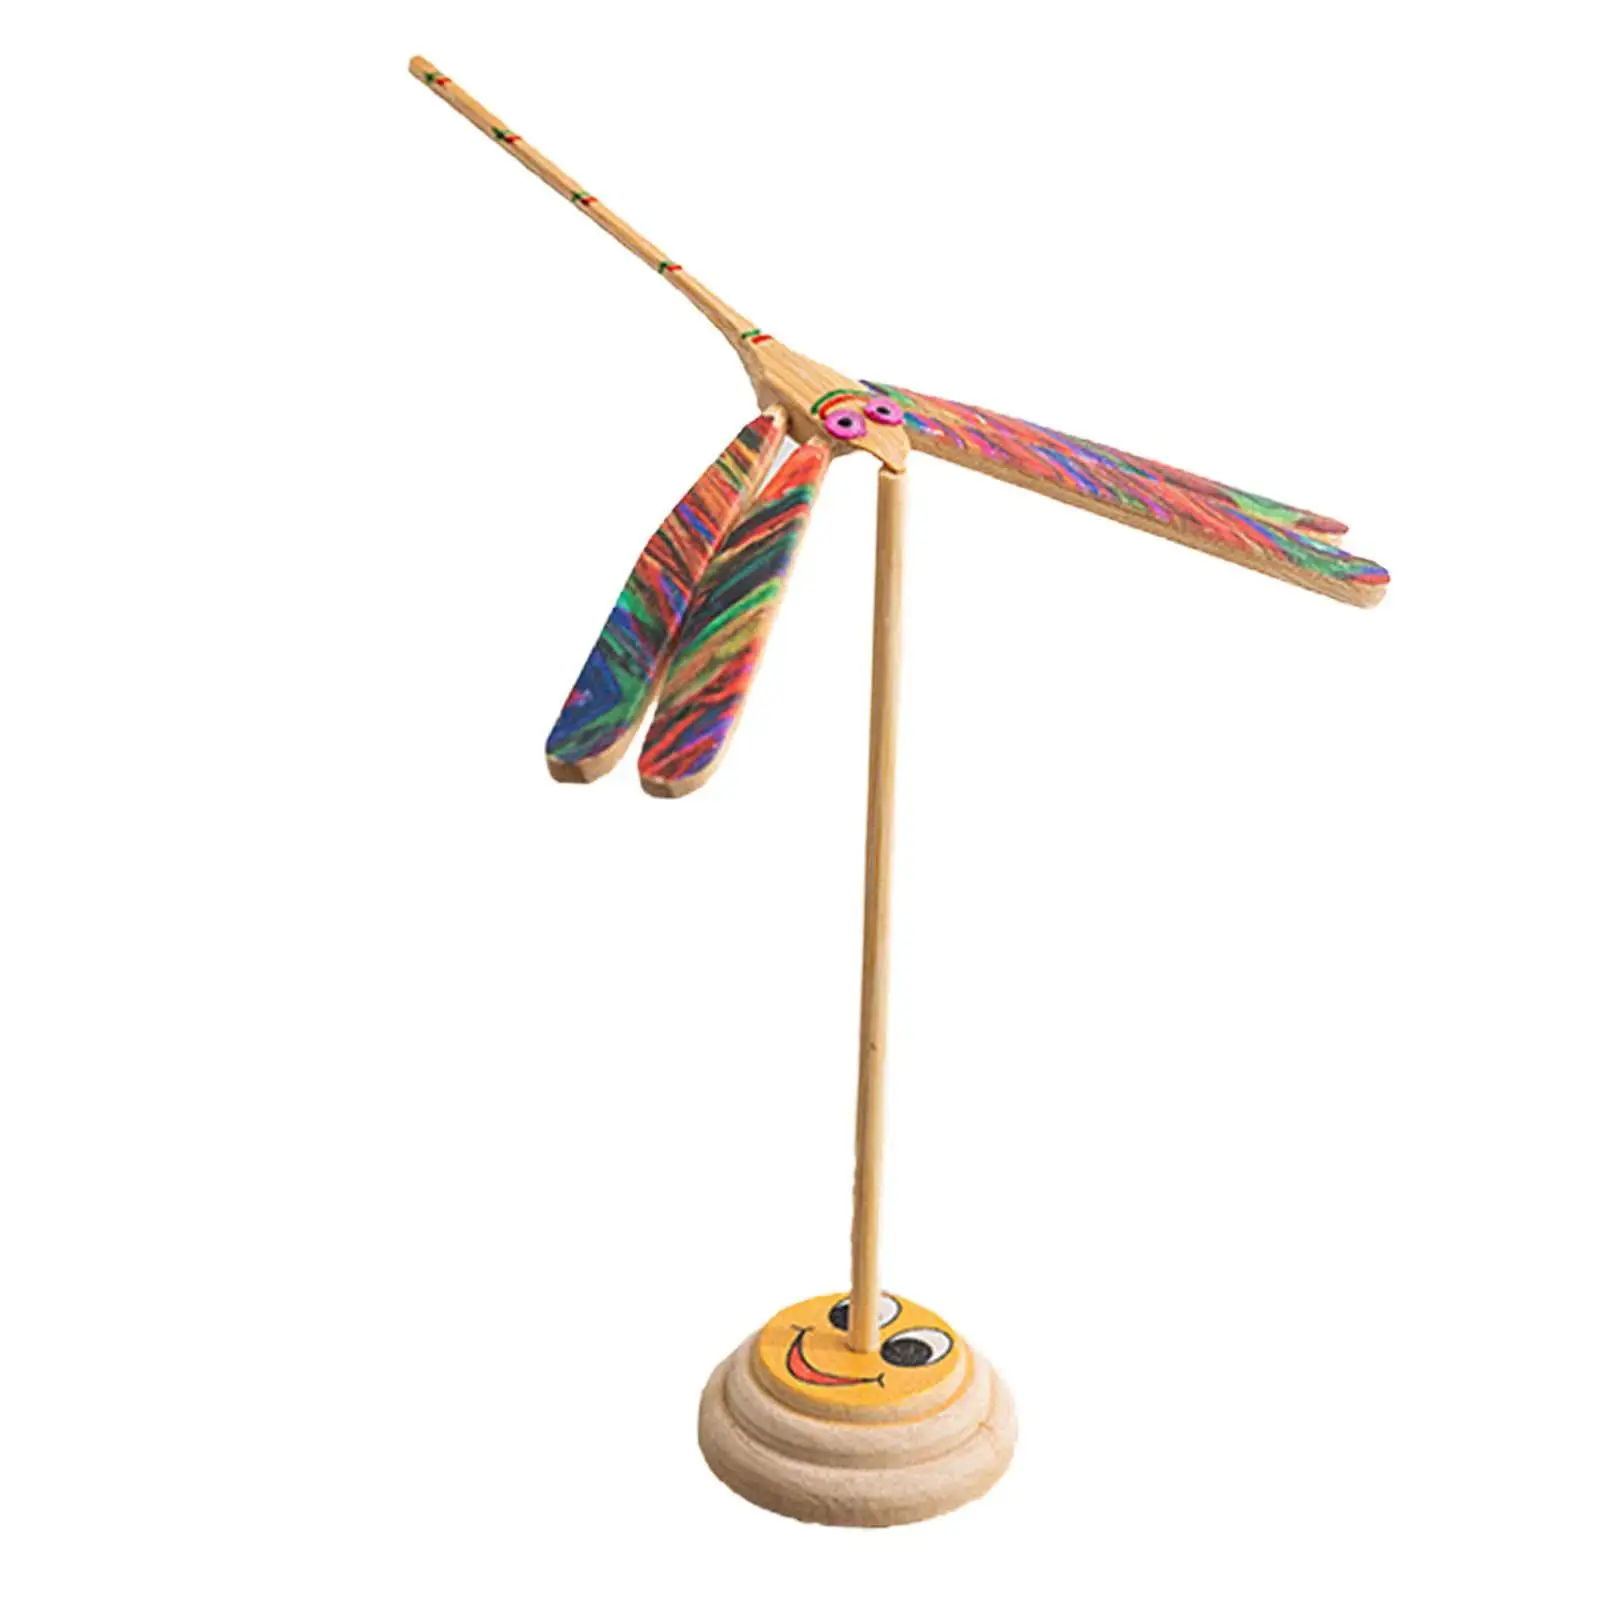 Bamboo Dragonfly Toy Nostalgic Handmade Desktop Decoration Balancing Dragonfly for Aniversary Party Favor Countertop Bedroom